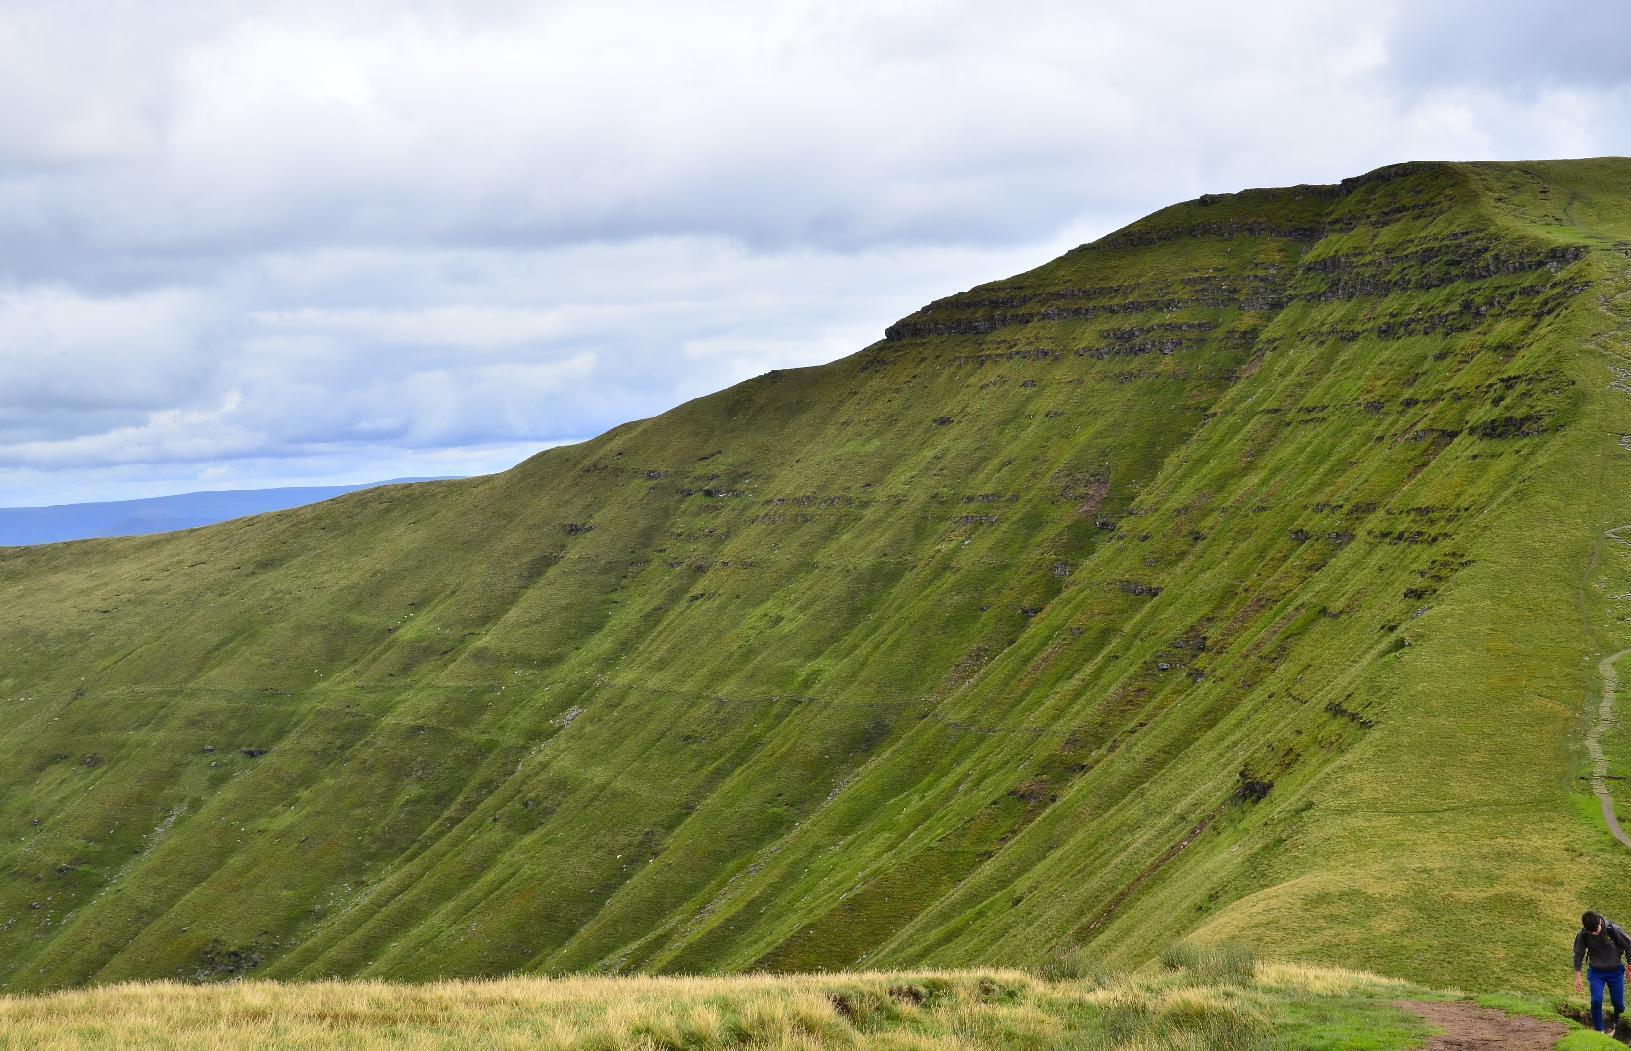 The north face of Cribyn seen while ascending Pen Y Fan